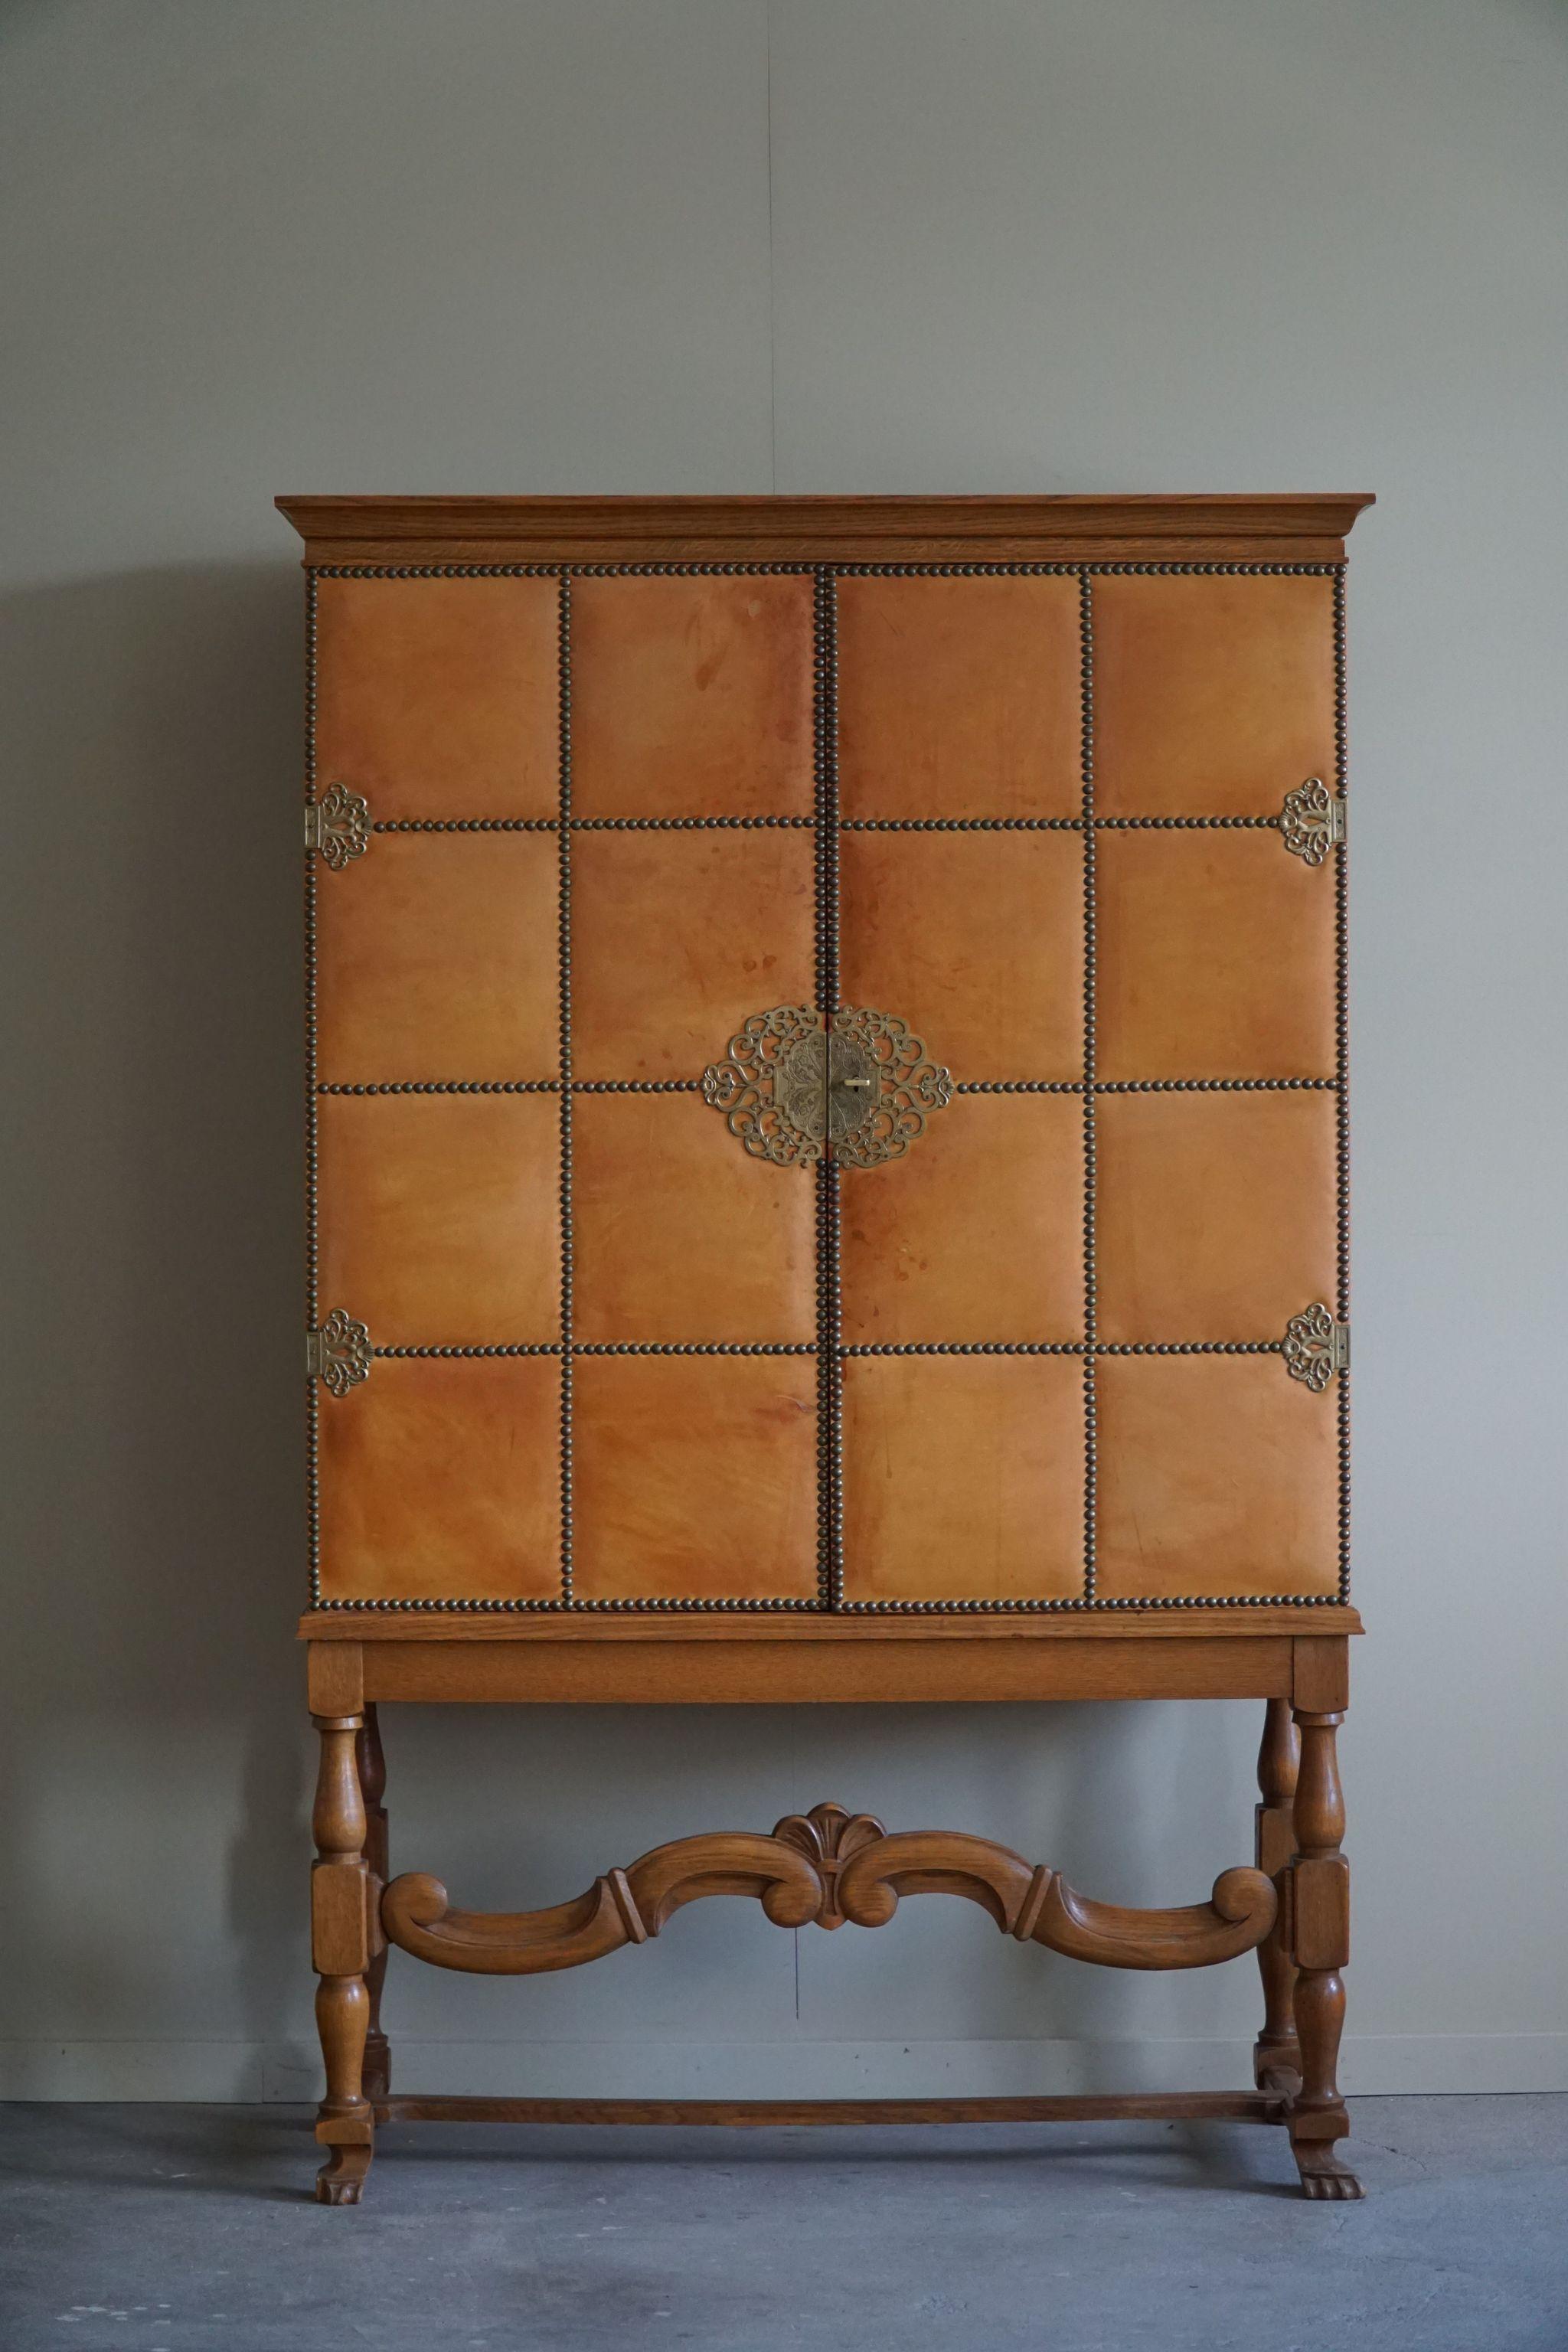 A spectacular cabinet attributed to the famous German born furniture designer Otto Schulz for Boet in Göteborg, Sweden.
The front is covered in a decadent cognac leather with brass nails and finely carved legs. Inside you will find two drawers and